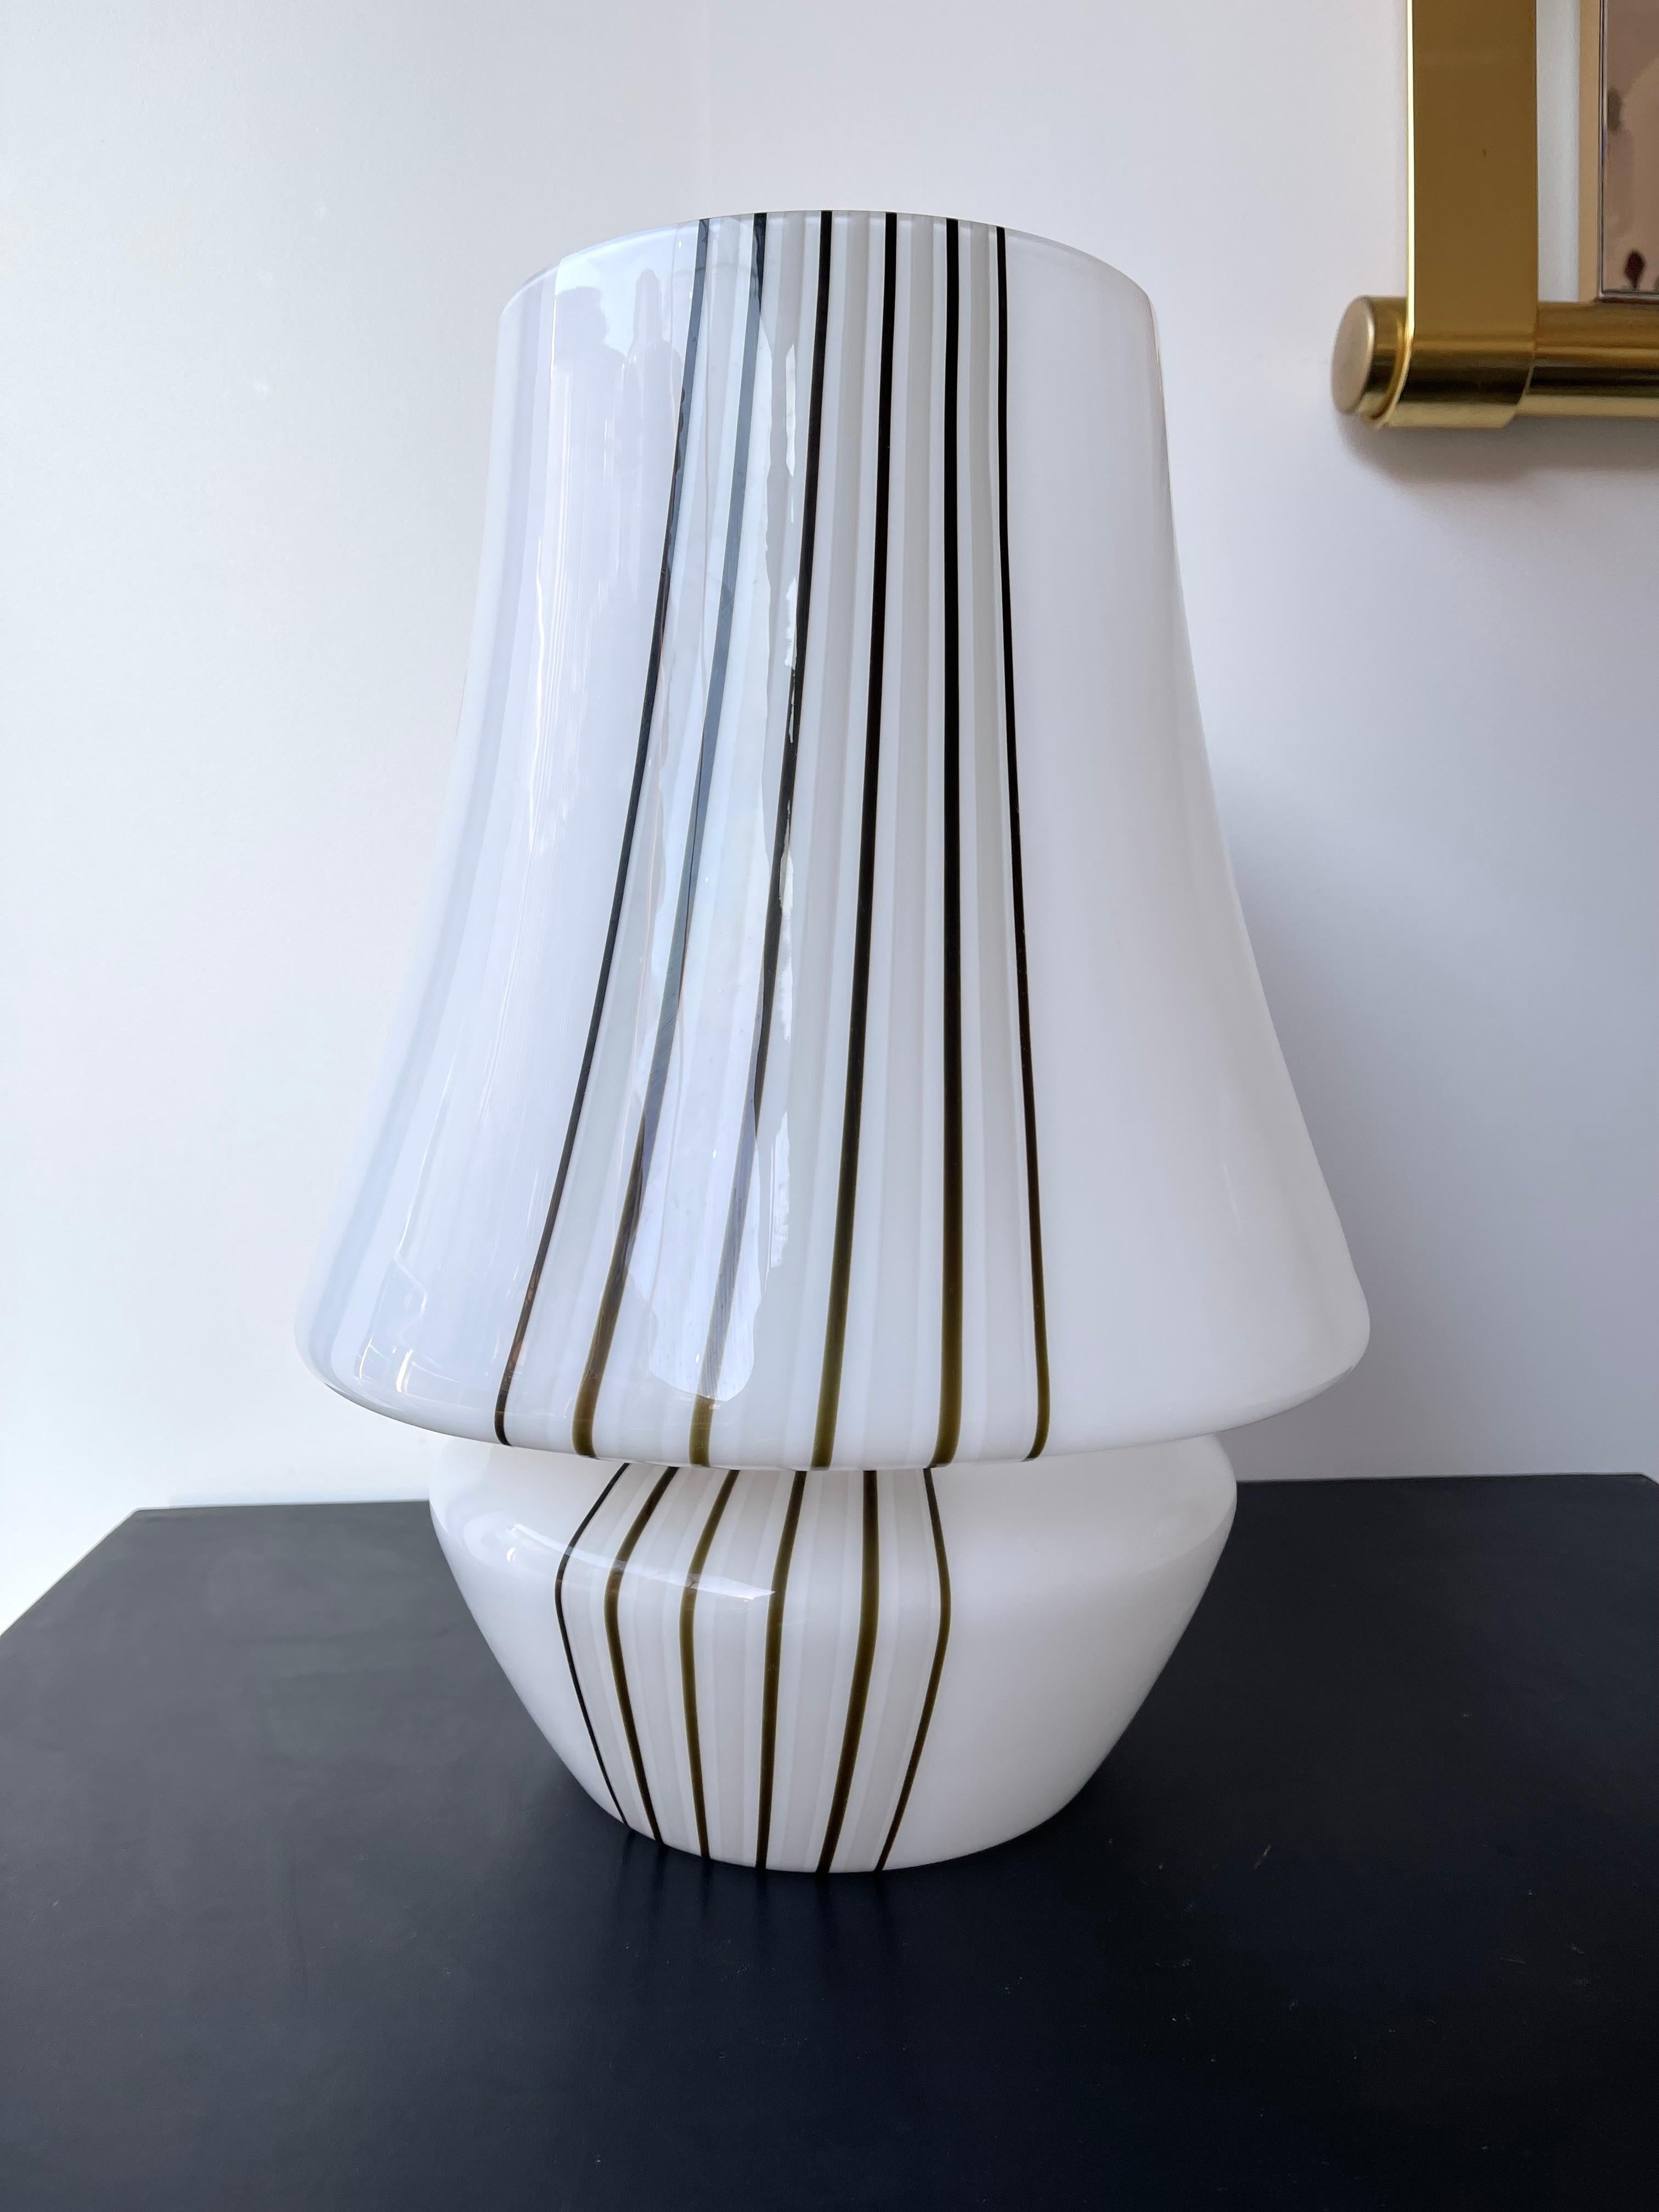 Pair of Large Stripe Murano Glass Lamps, Italy, 1970s For Sale 3